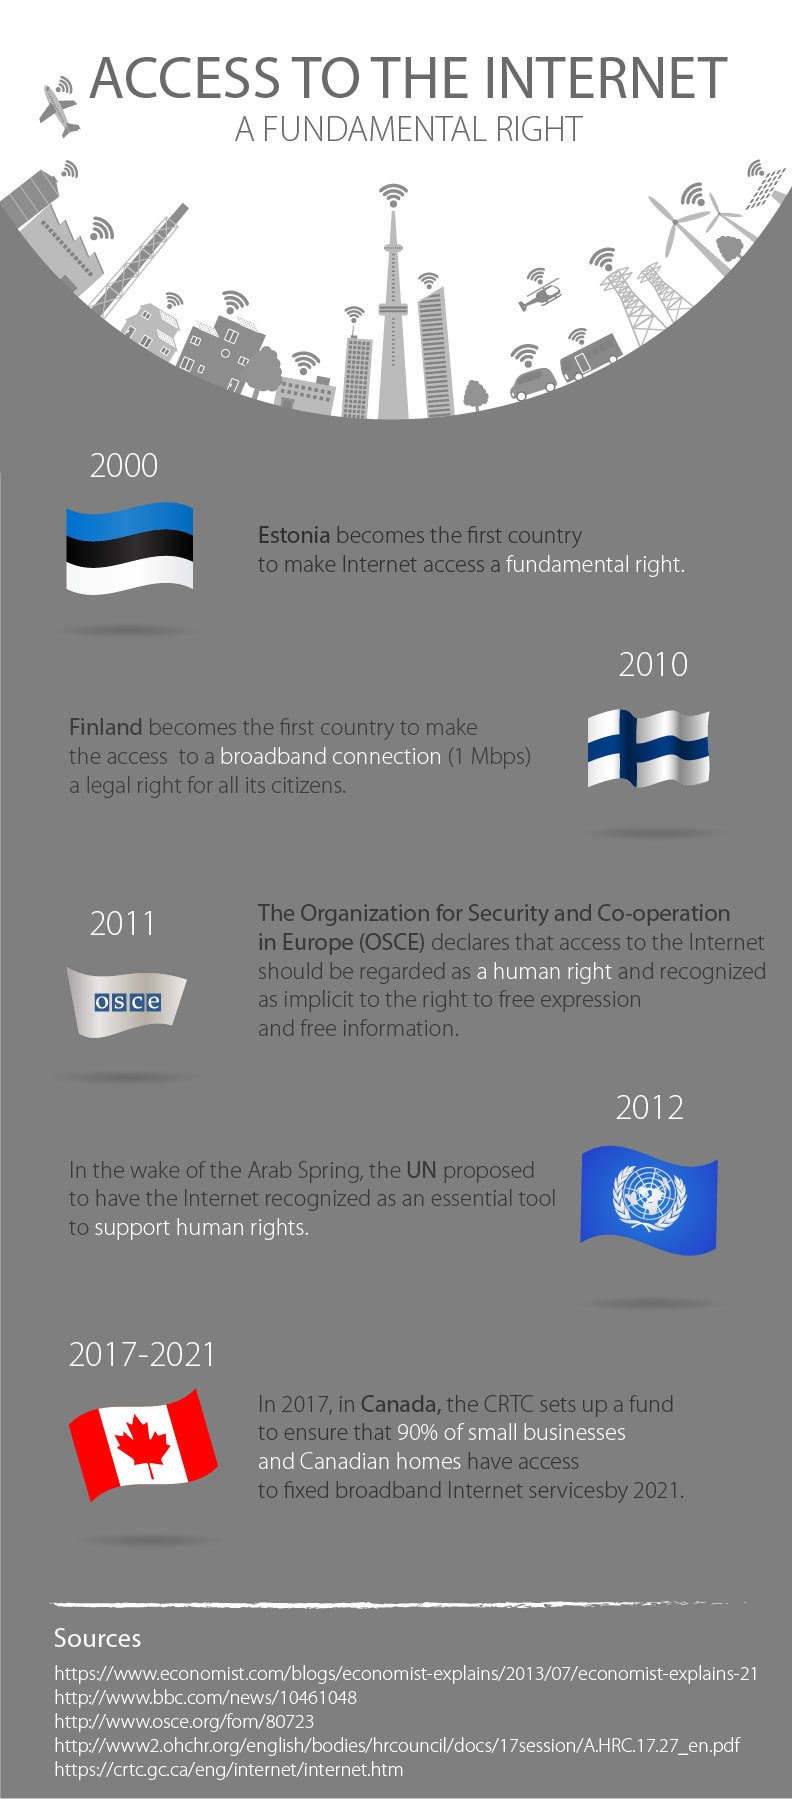 The Internet as a Fundamental Right Infographic